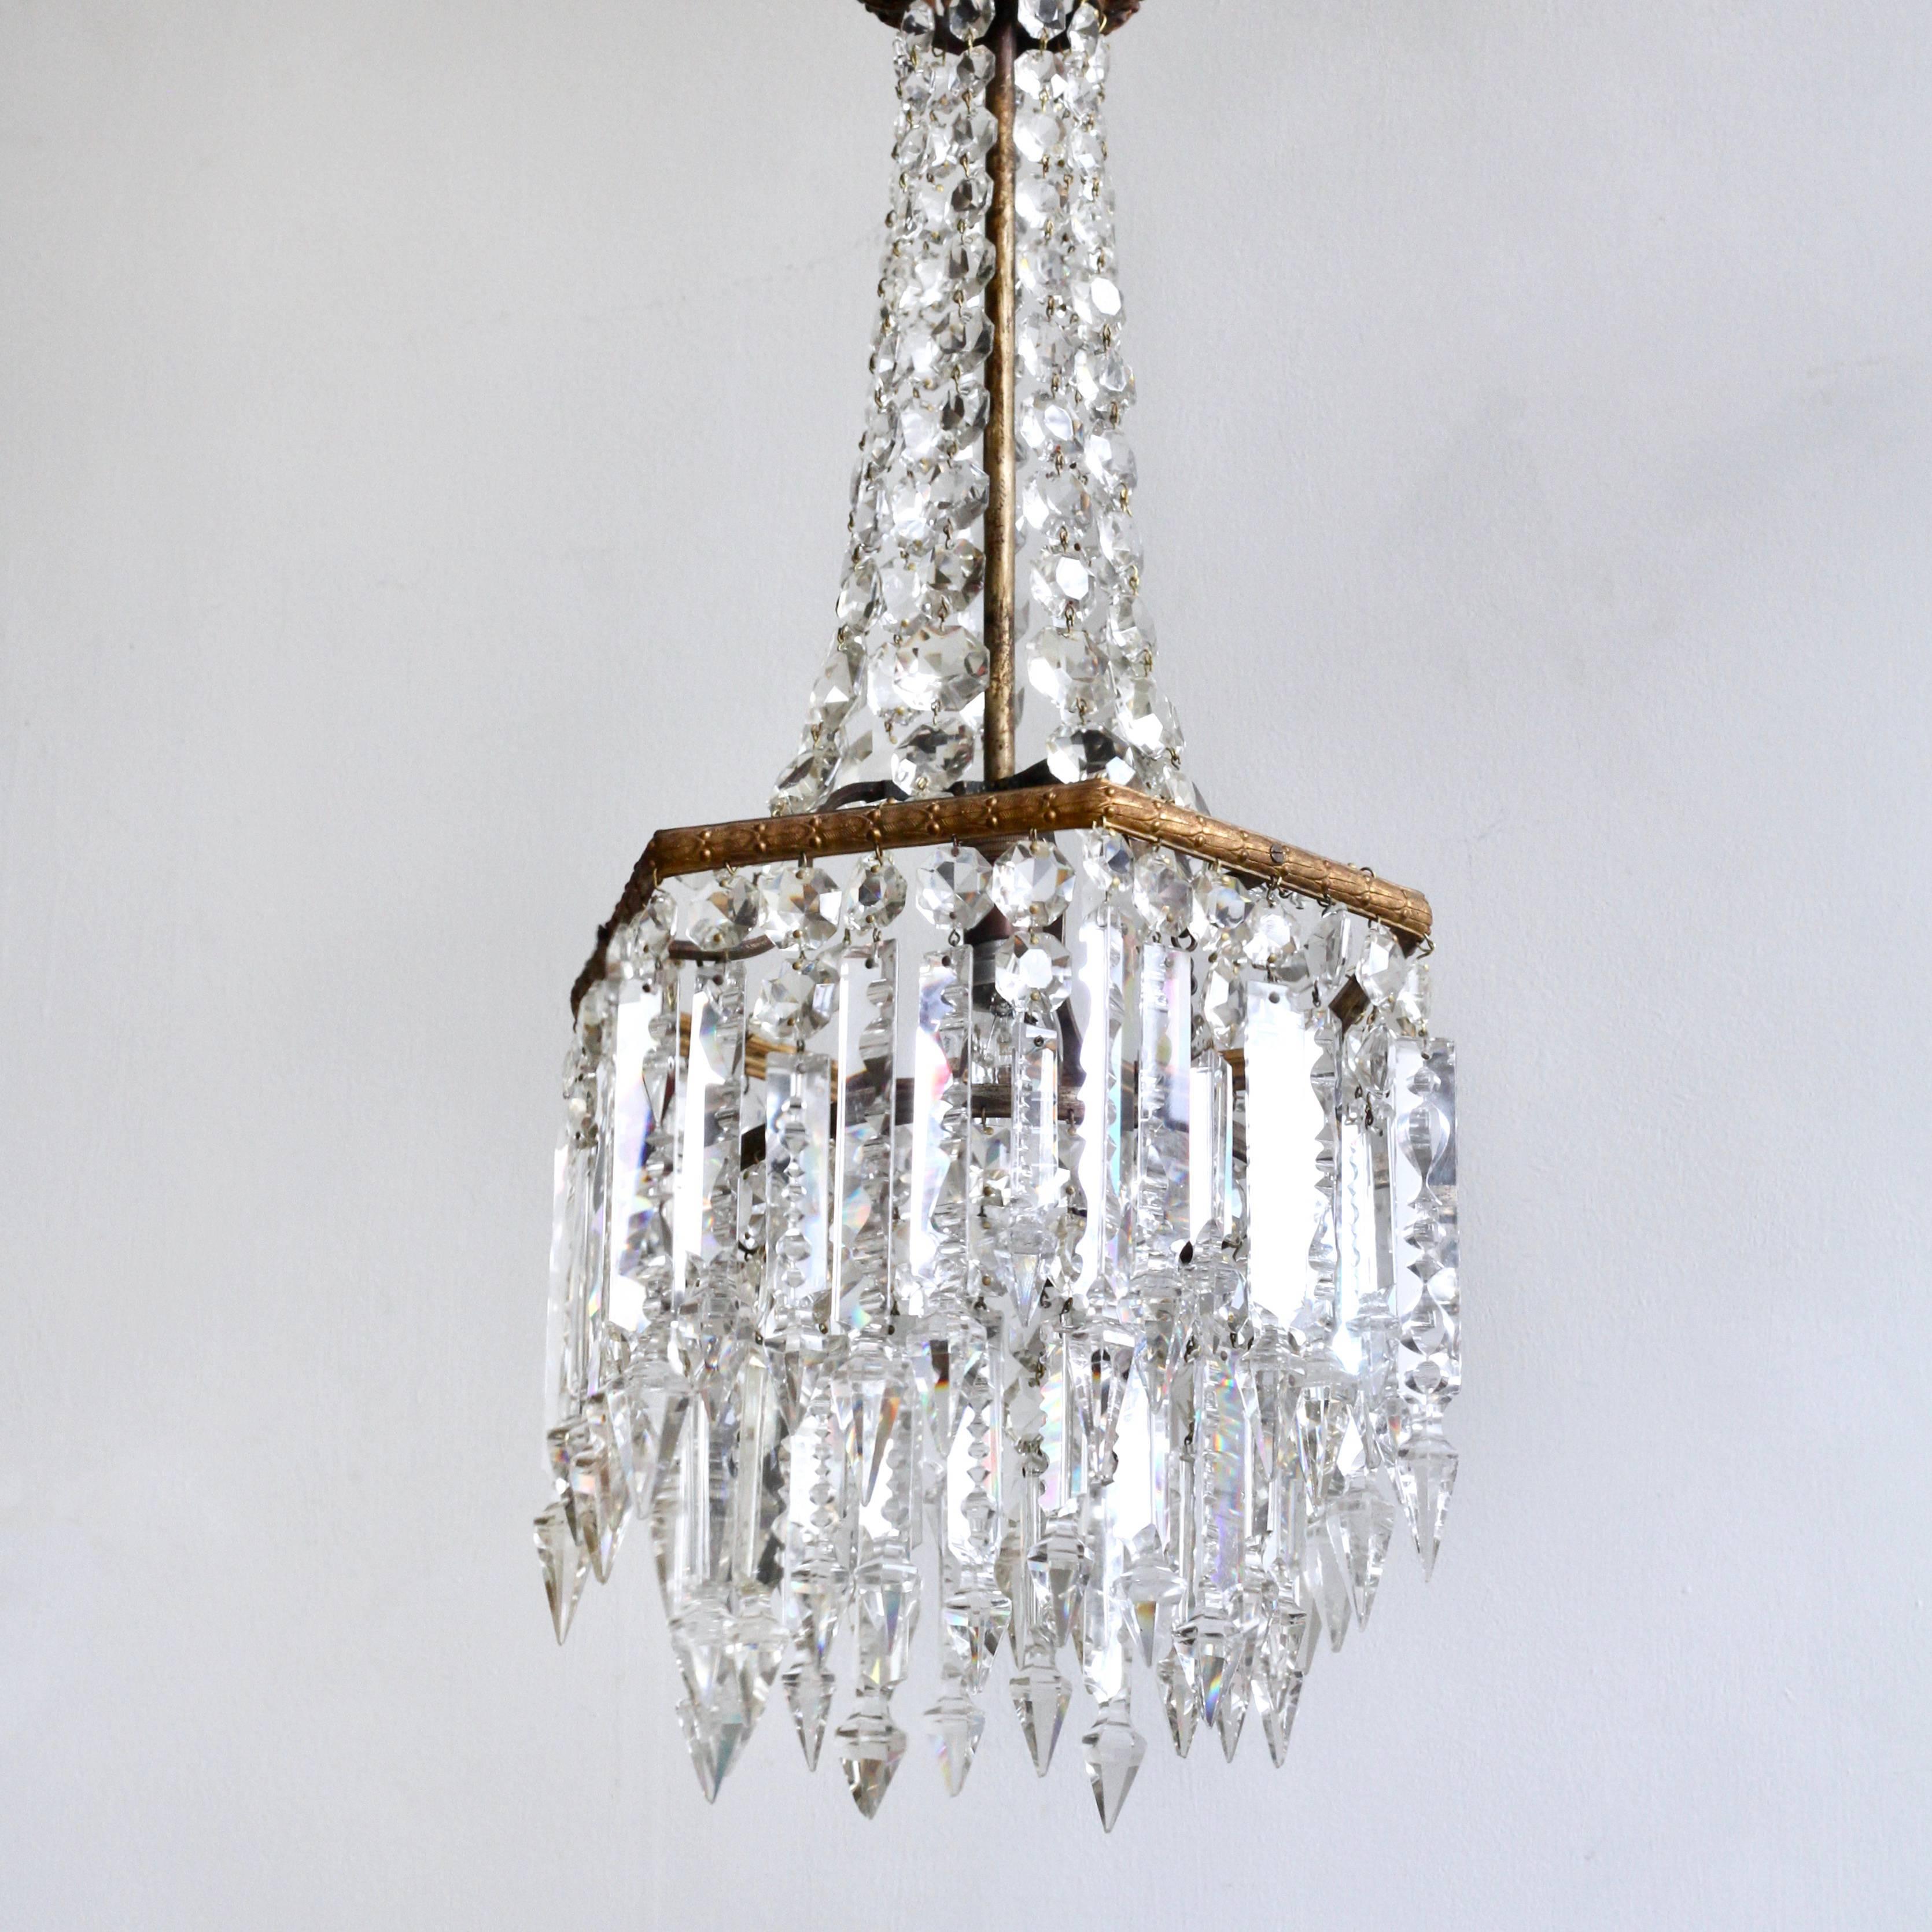 A stunning example of an English crystal waterfall chandelier. The cast gilt brass upper frame is hexagonal with a lower circular frame adjoined with chain. The upper gilt coroner forms the upper section of the chandelier with swags of handcuff